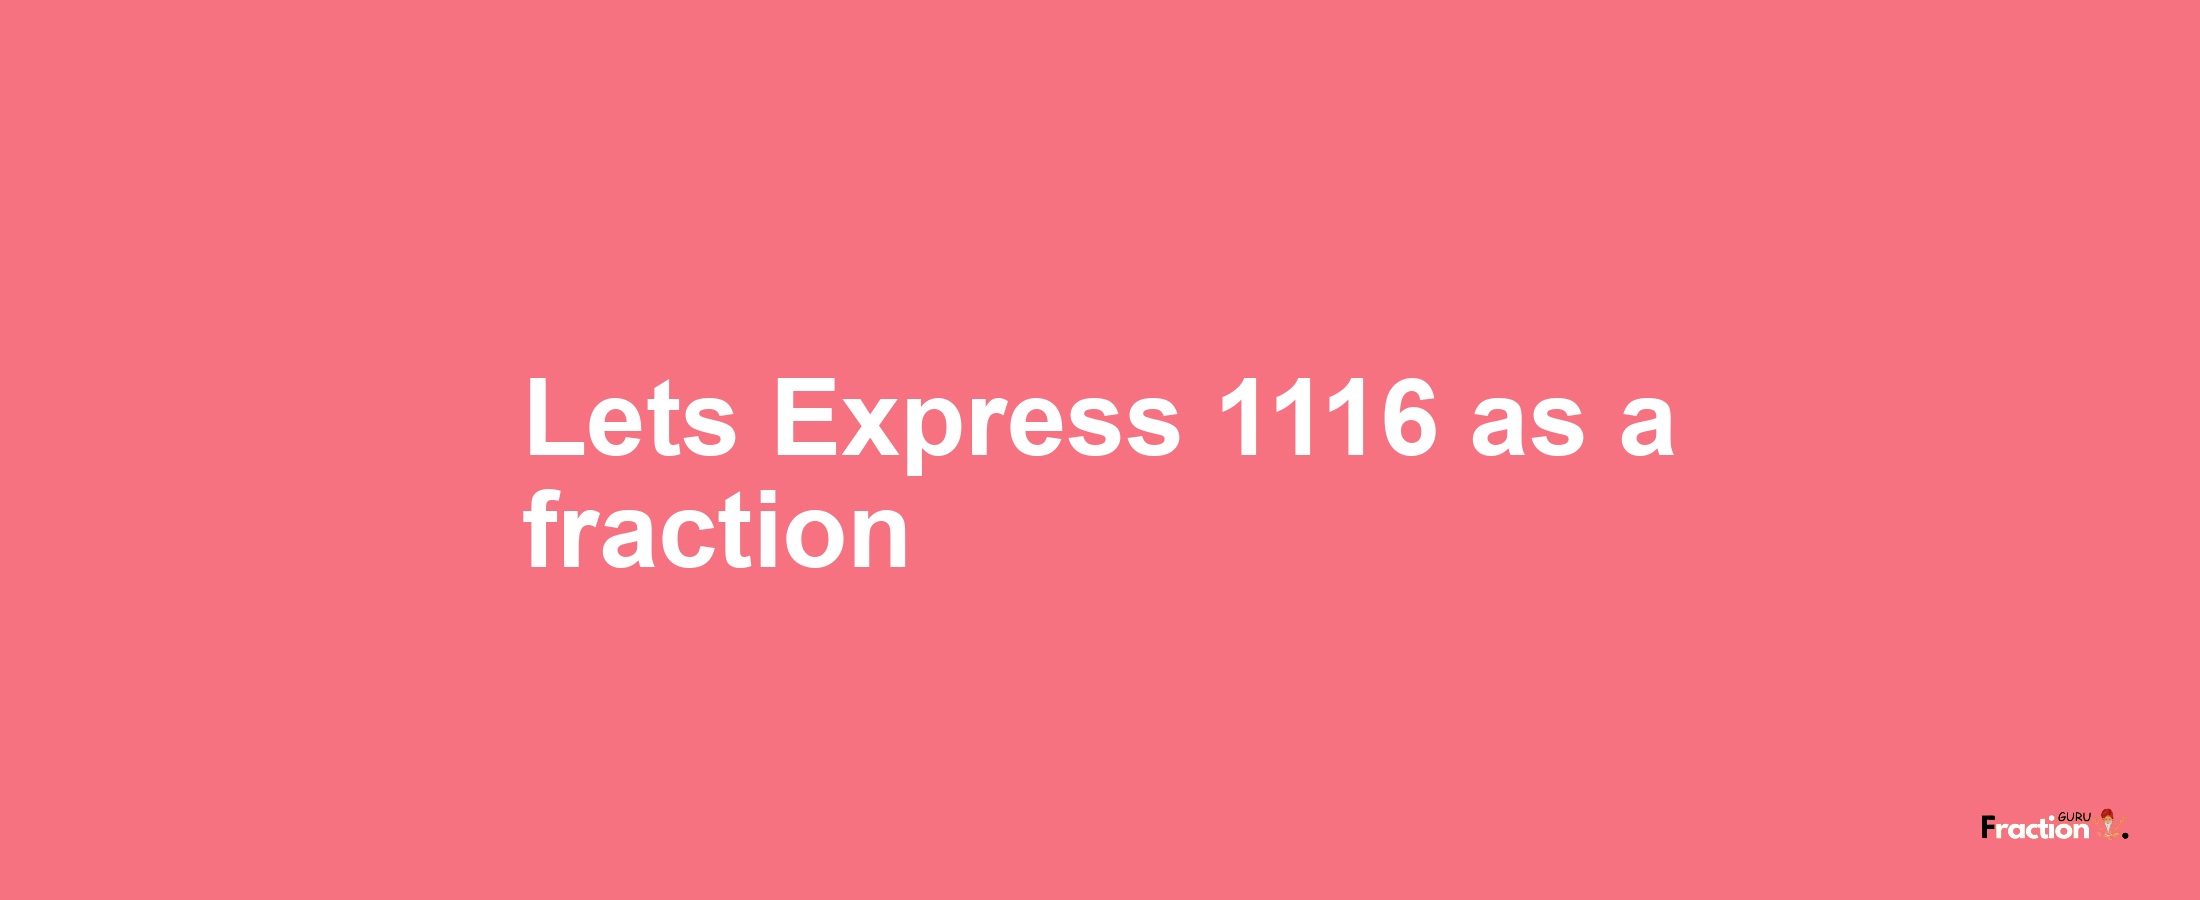 Lets Express 1116 as afraction